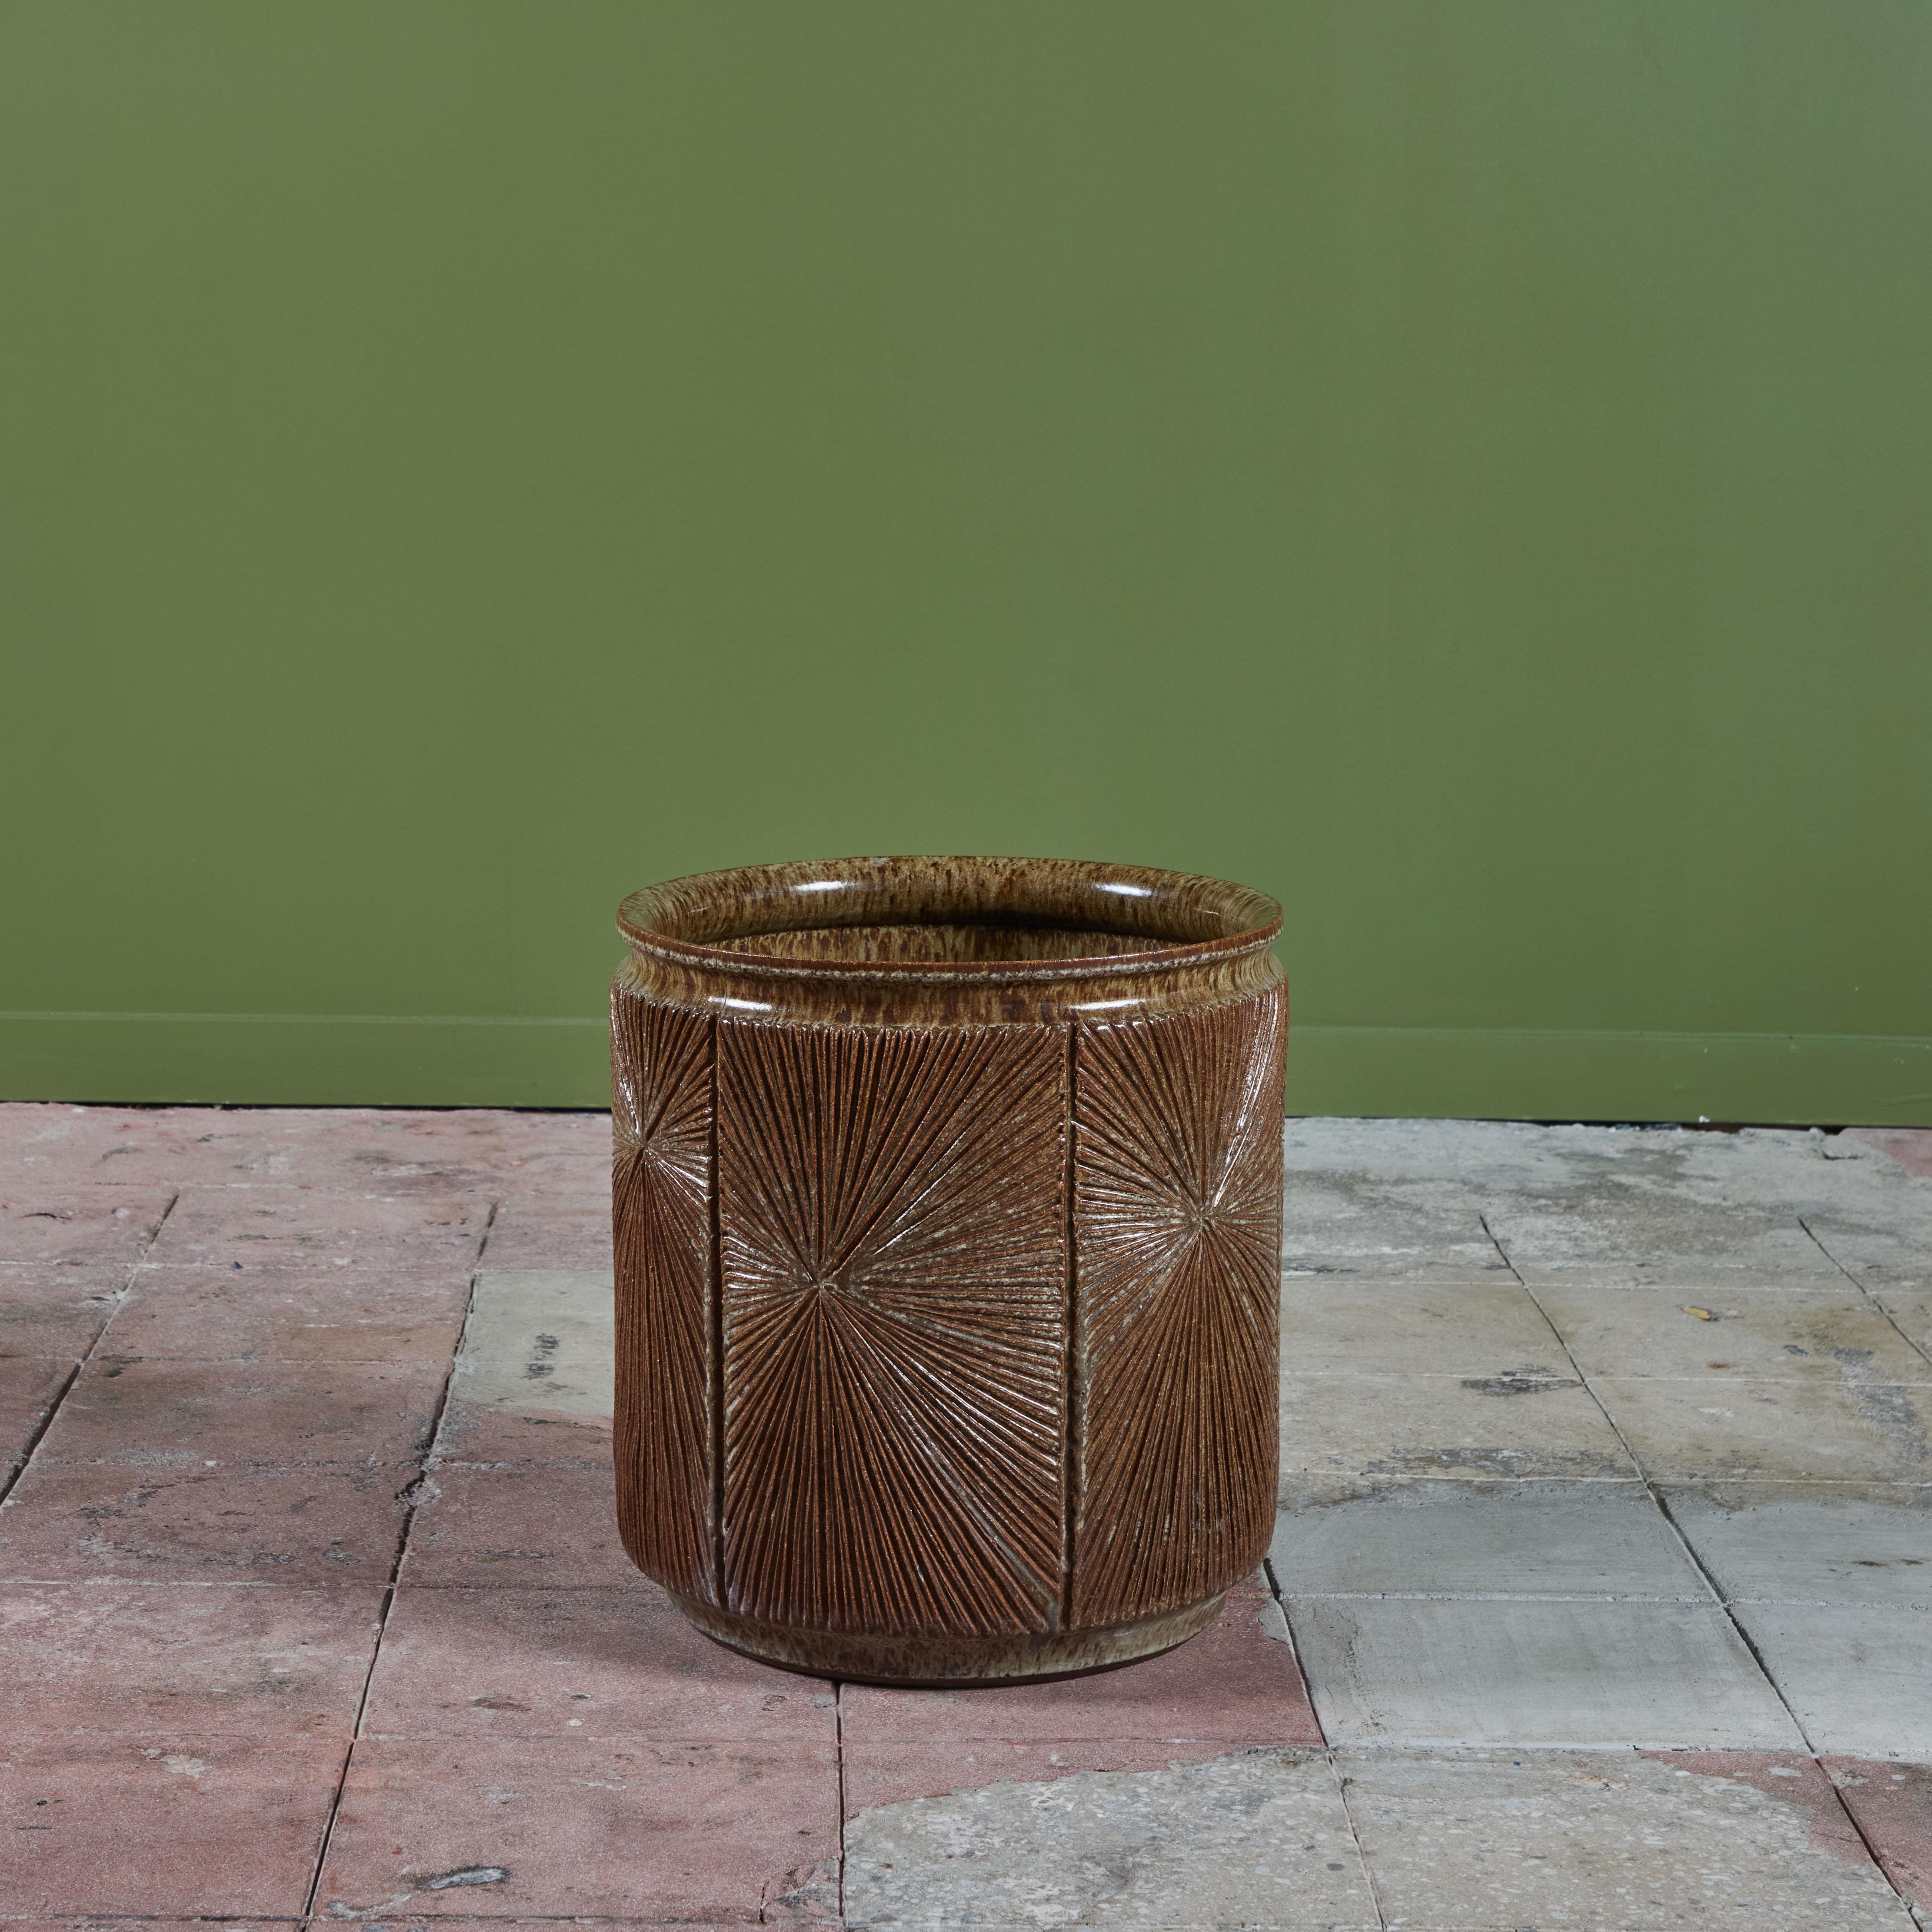 David Cressey & Robert Maxwell for Earthgender “Sunburst” Planter Taupe Glaze In Excellent Condition For Sale In Los Angeles, CA